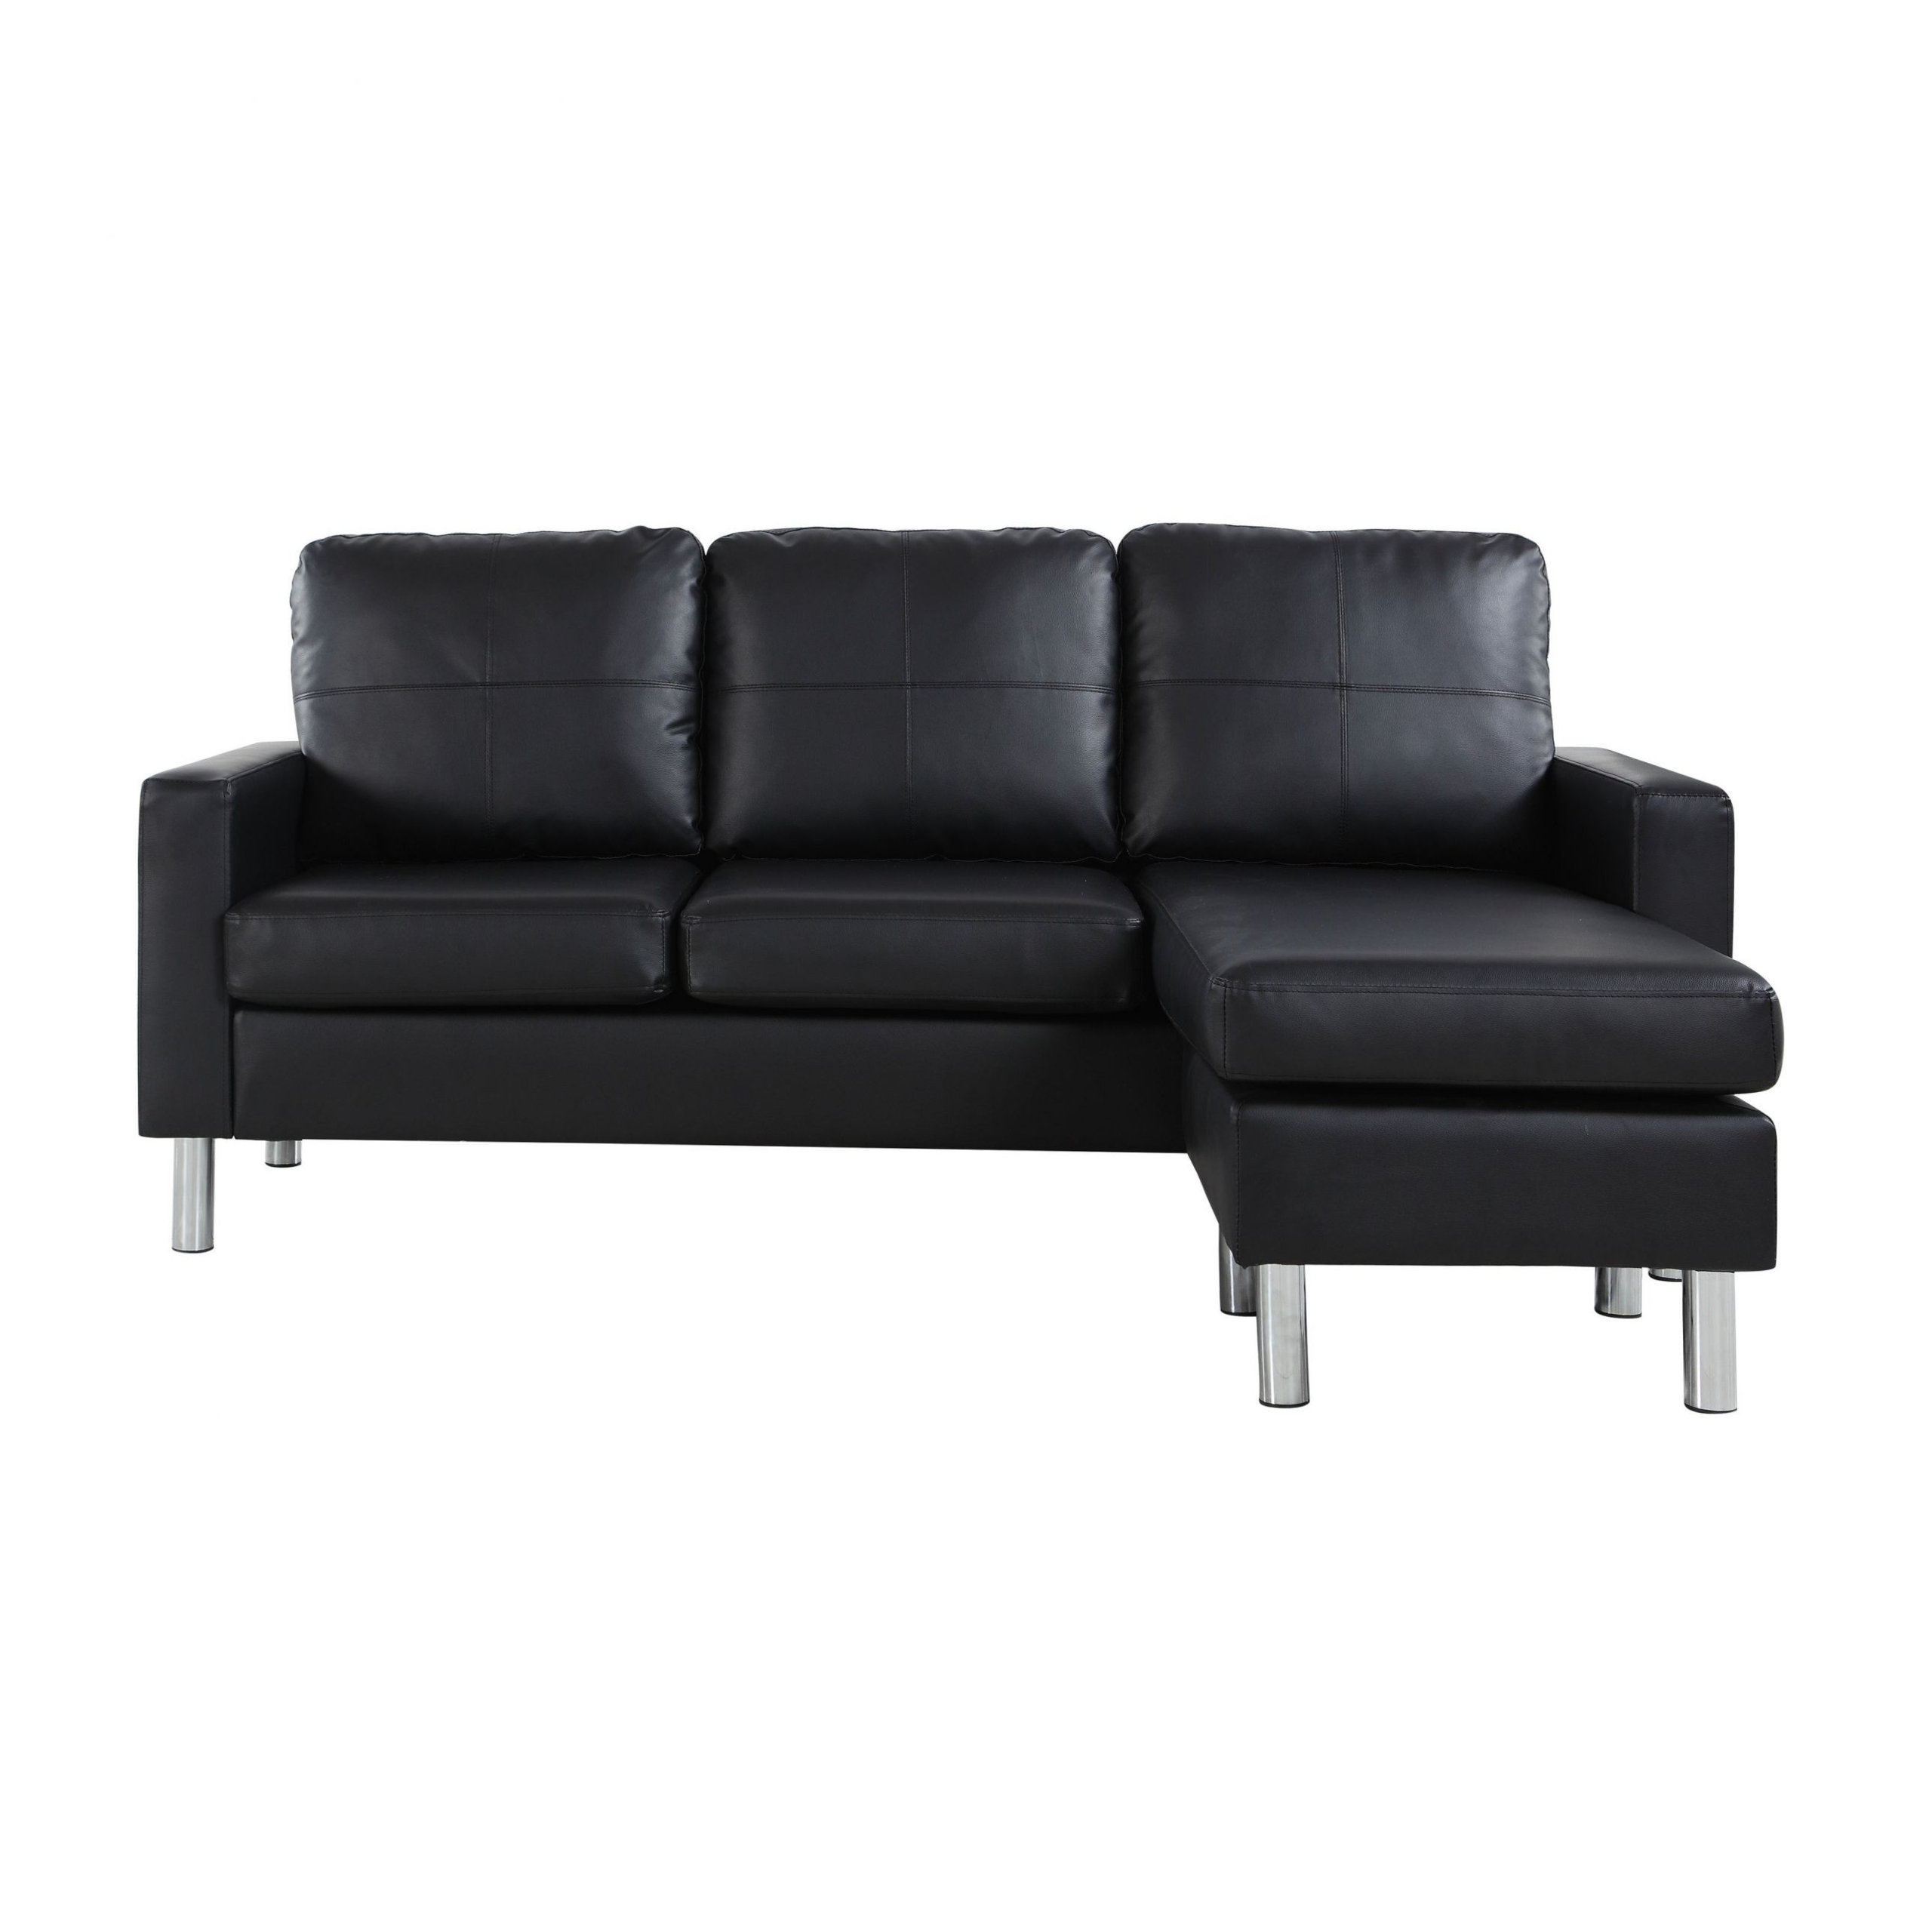 Small Leather Sectional You Ll Love In, Sectional Leather Sofas For Small Spaces